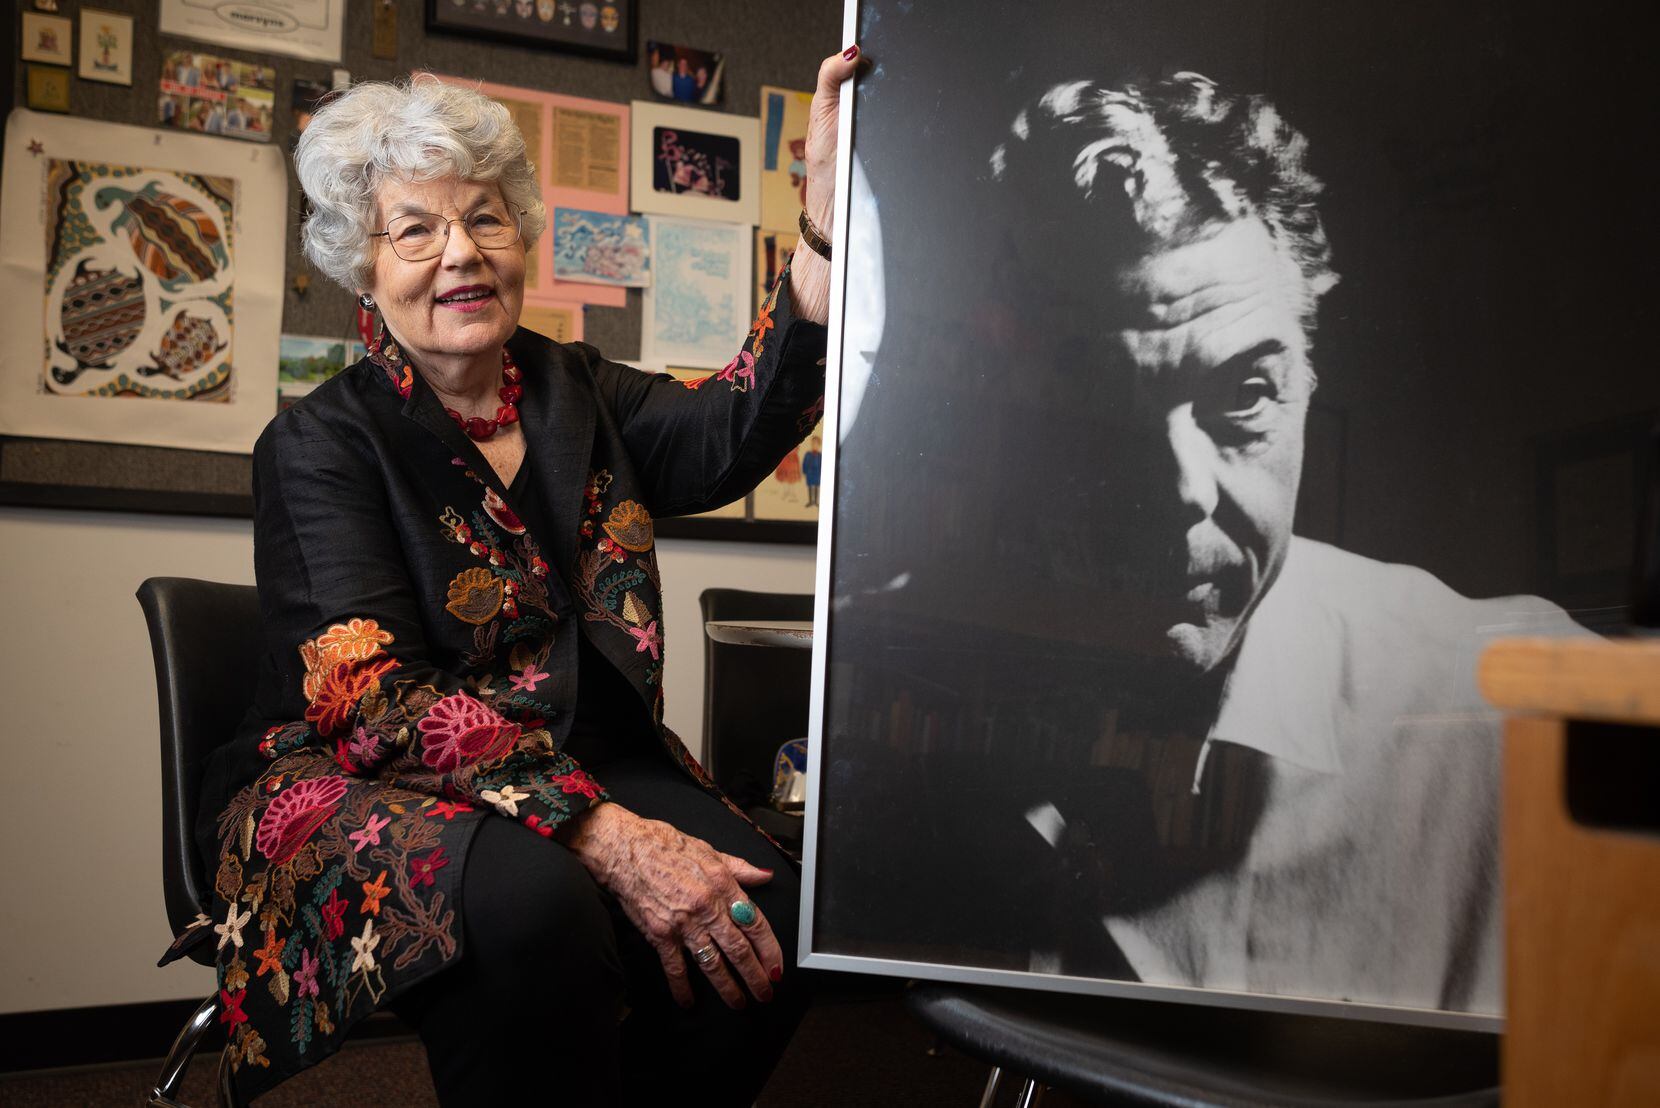 Robyn Flatt, co-founder of the Dallas Children's Theater, shown with an image of her father...